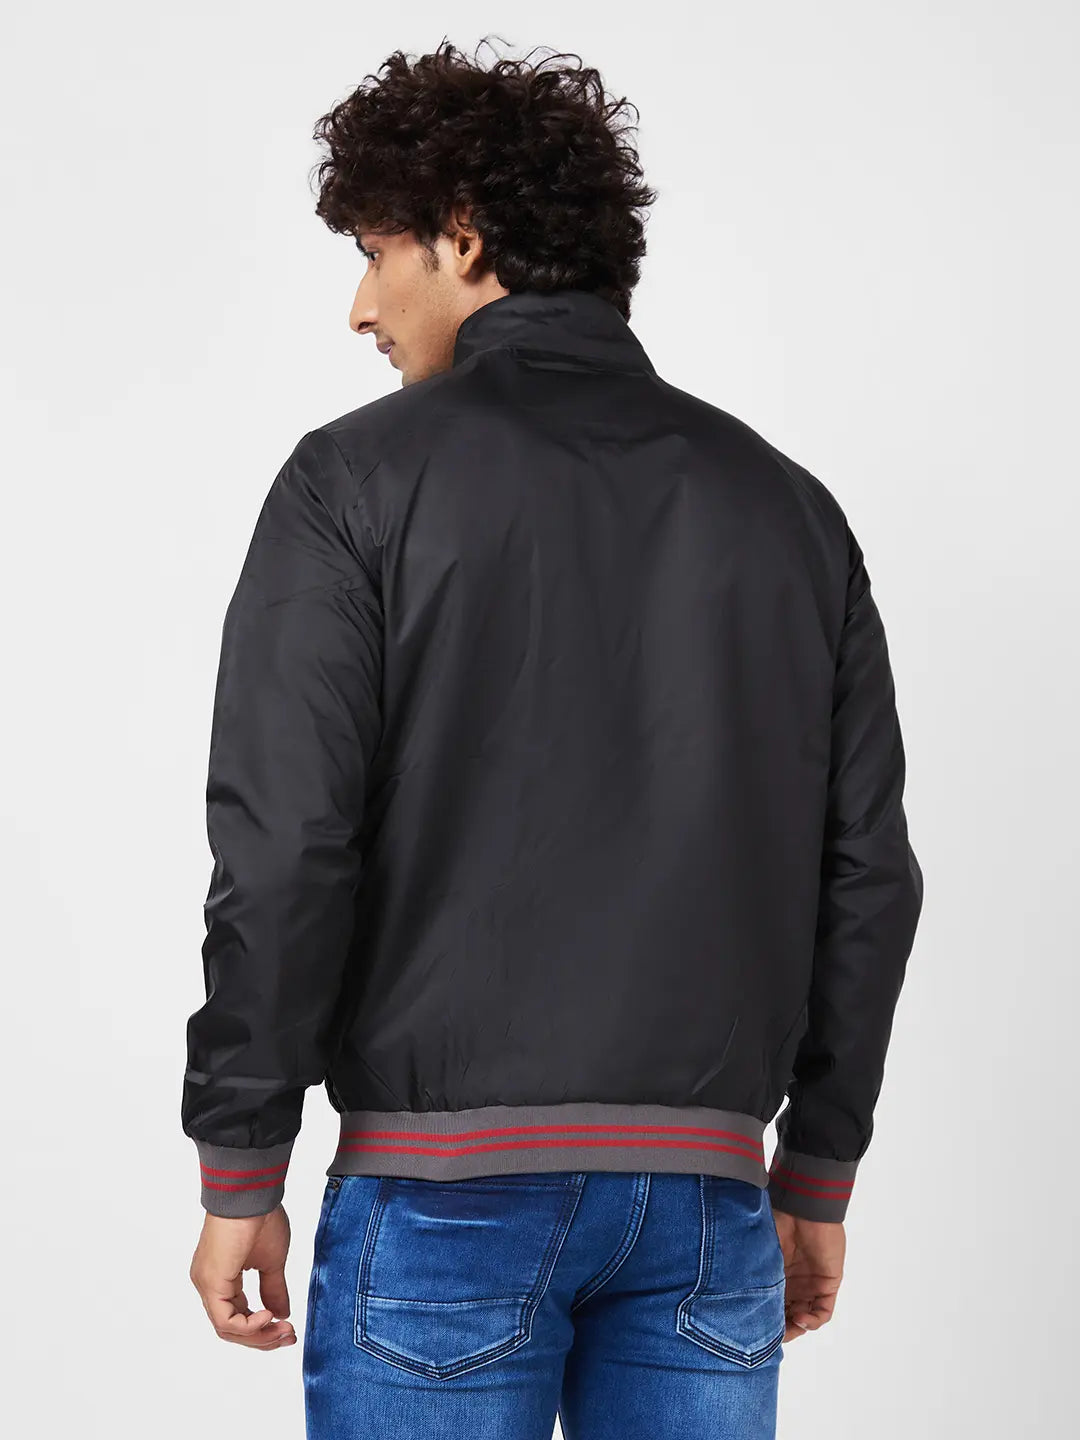 MEN'S SHELL JACKET WITH CHEST EMBROIDERY & CONTRAST RIB DETAIL